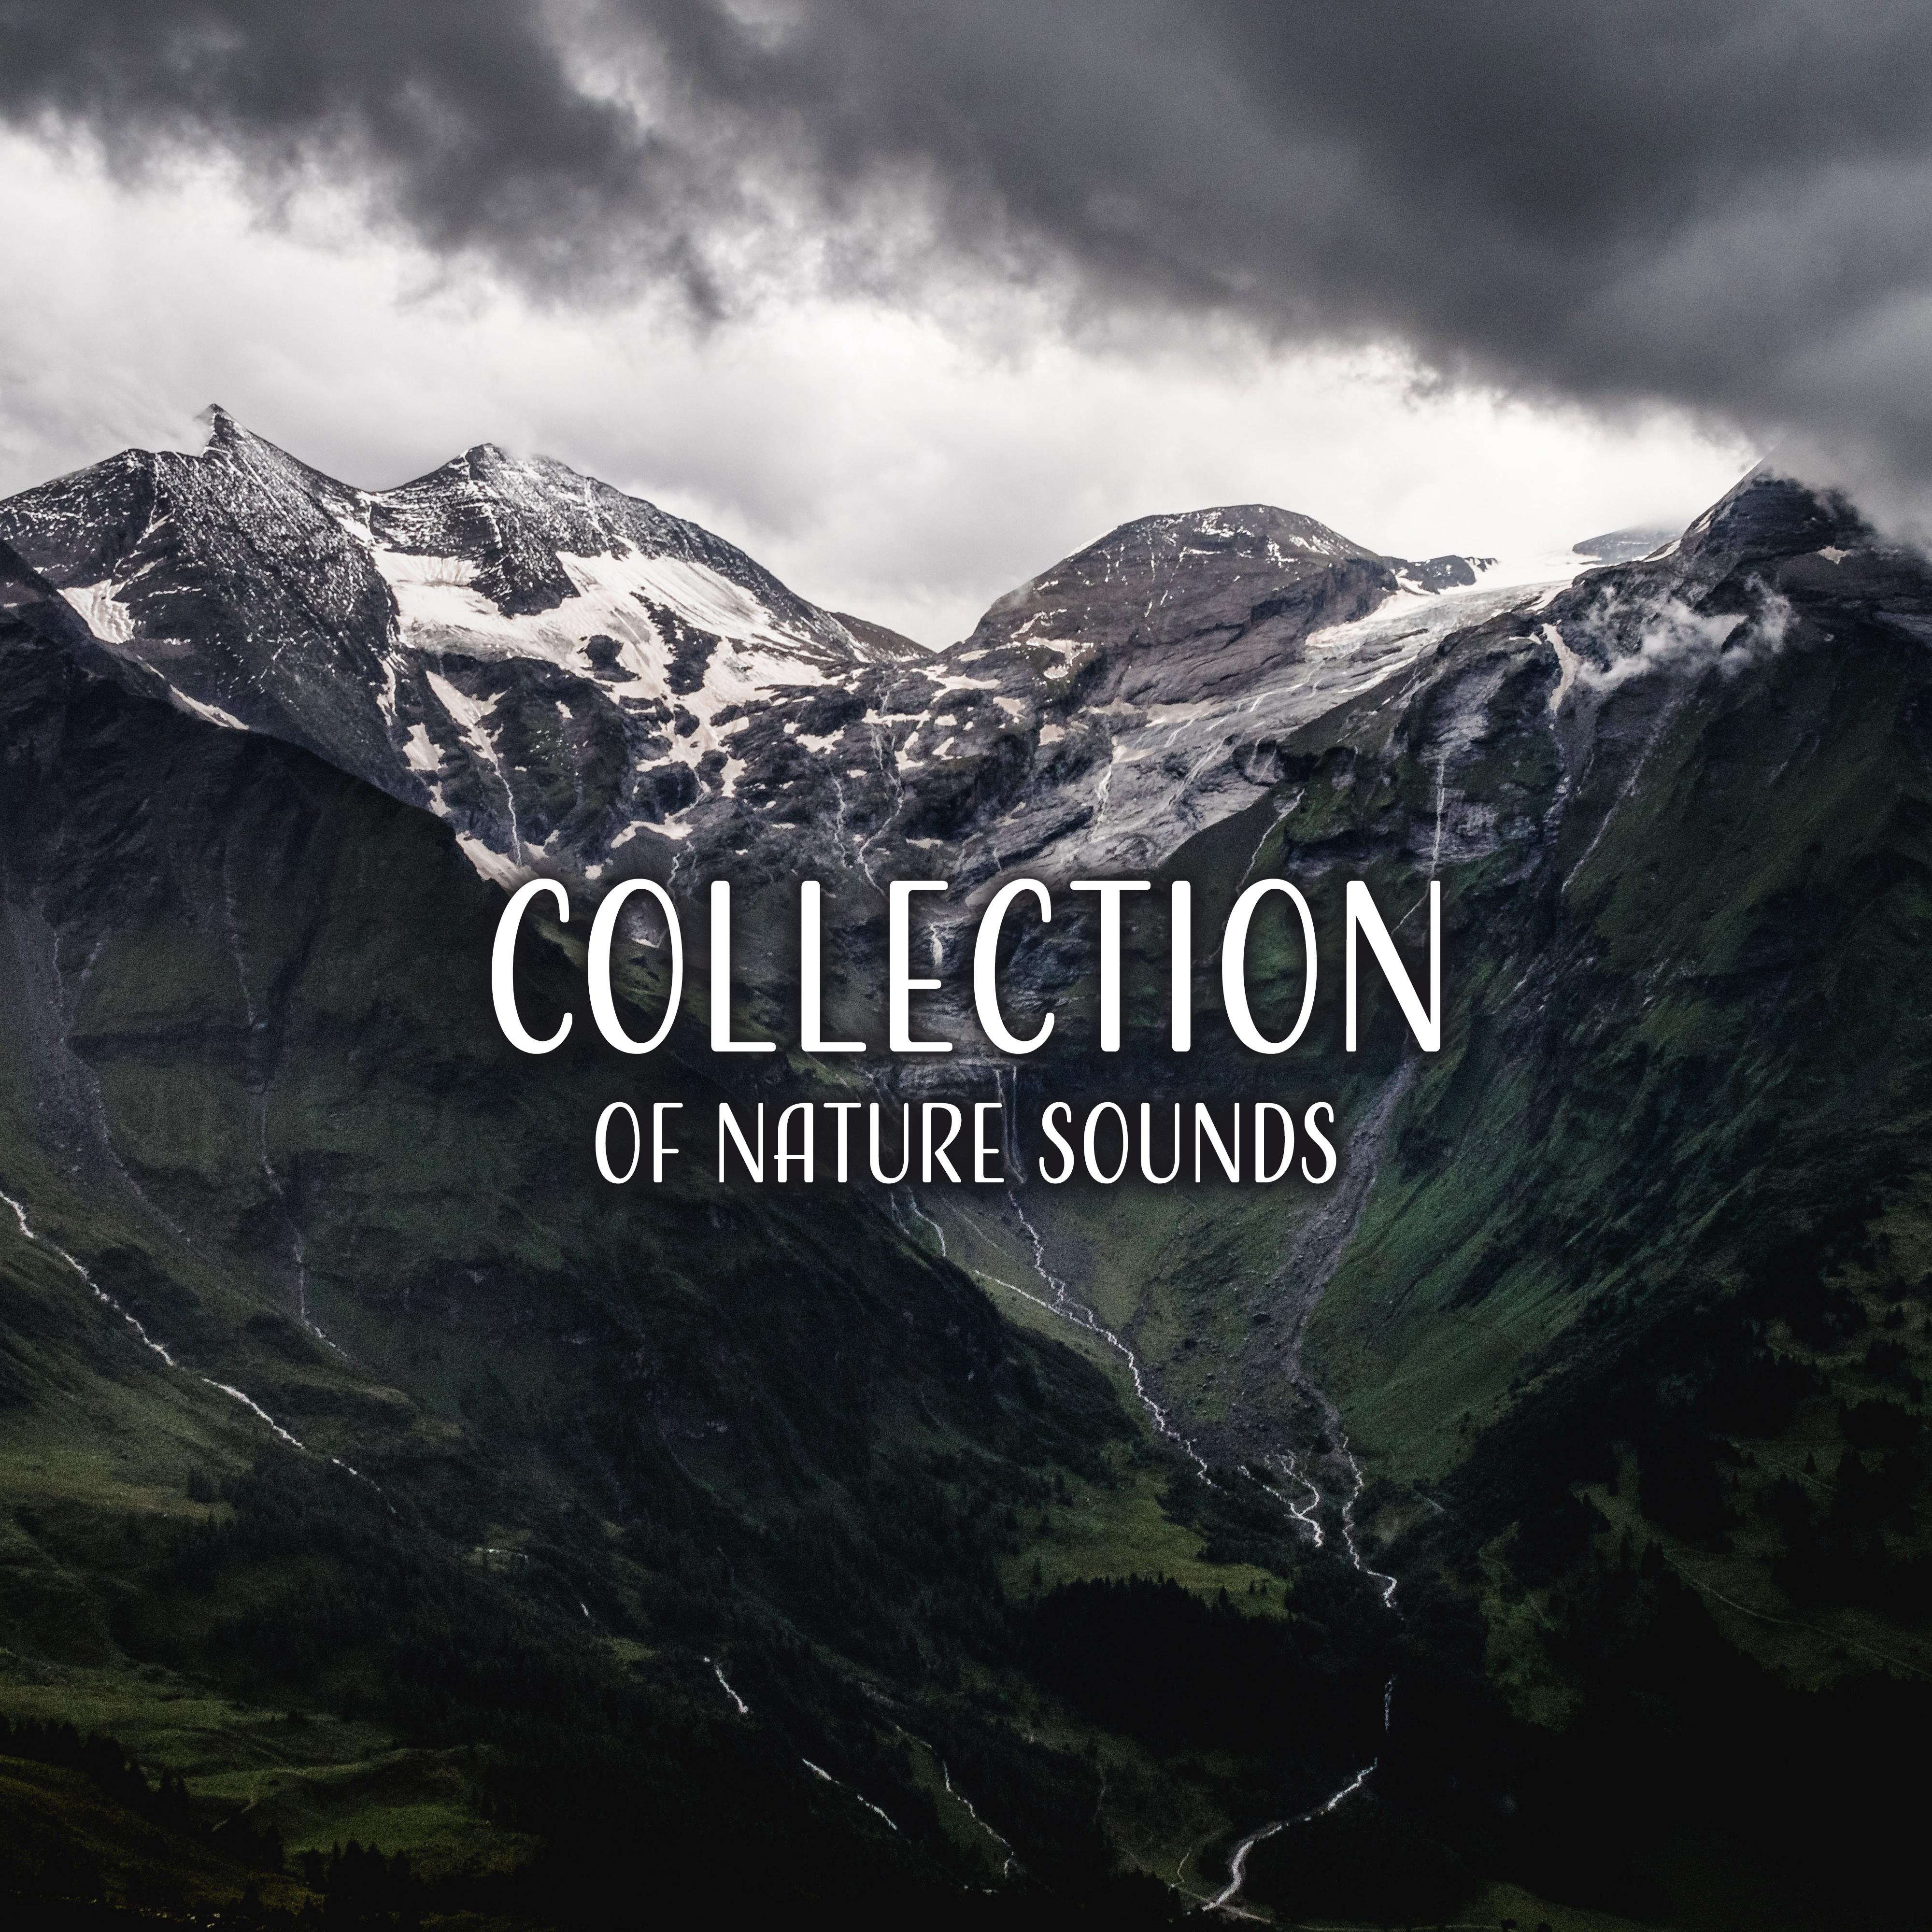 Collection of Nature Sounds